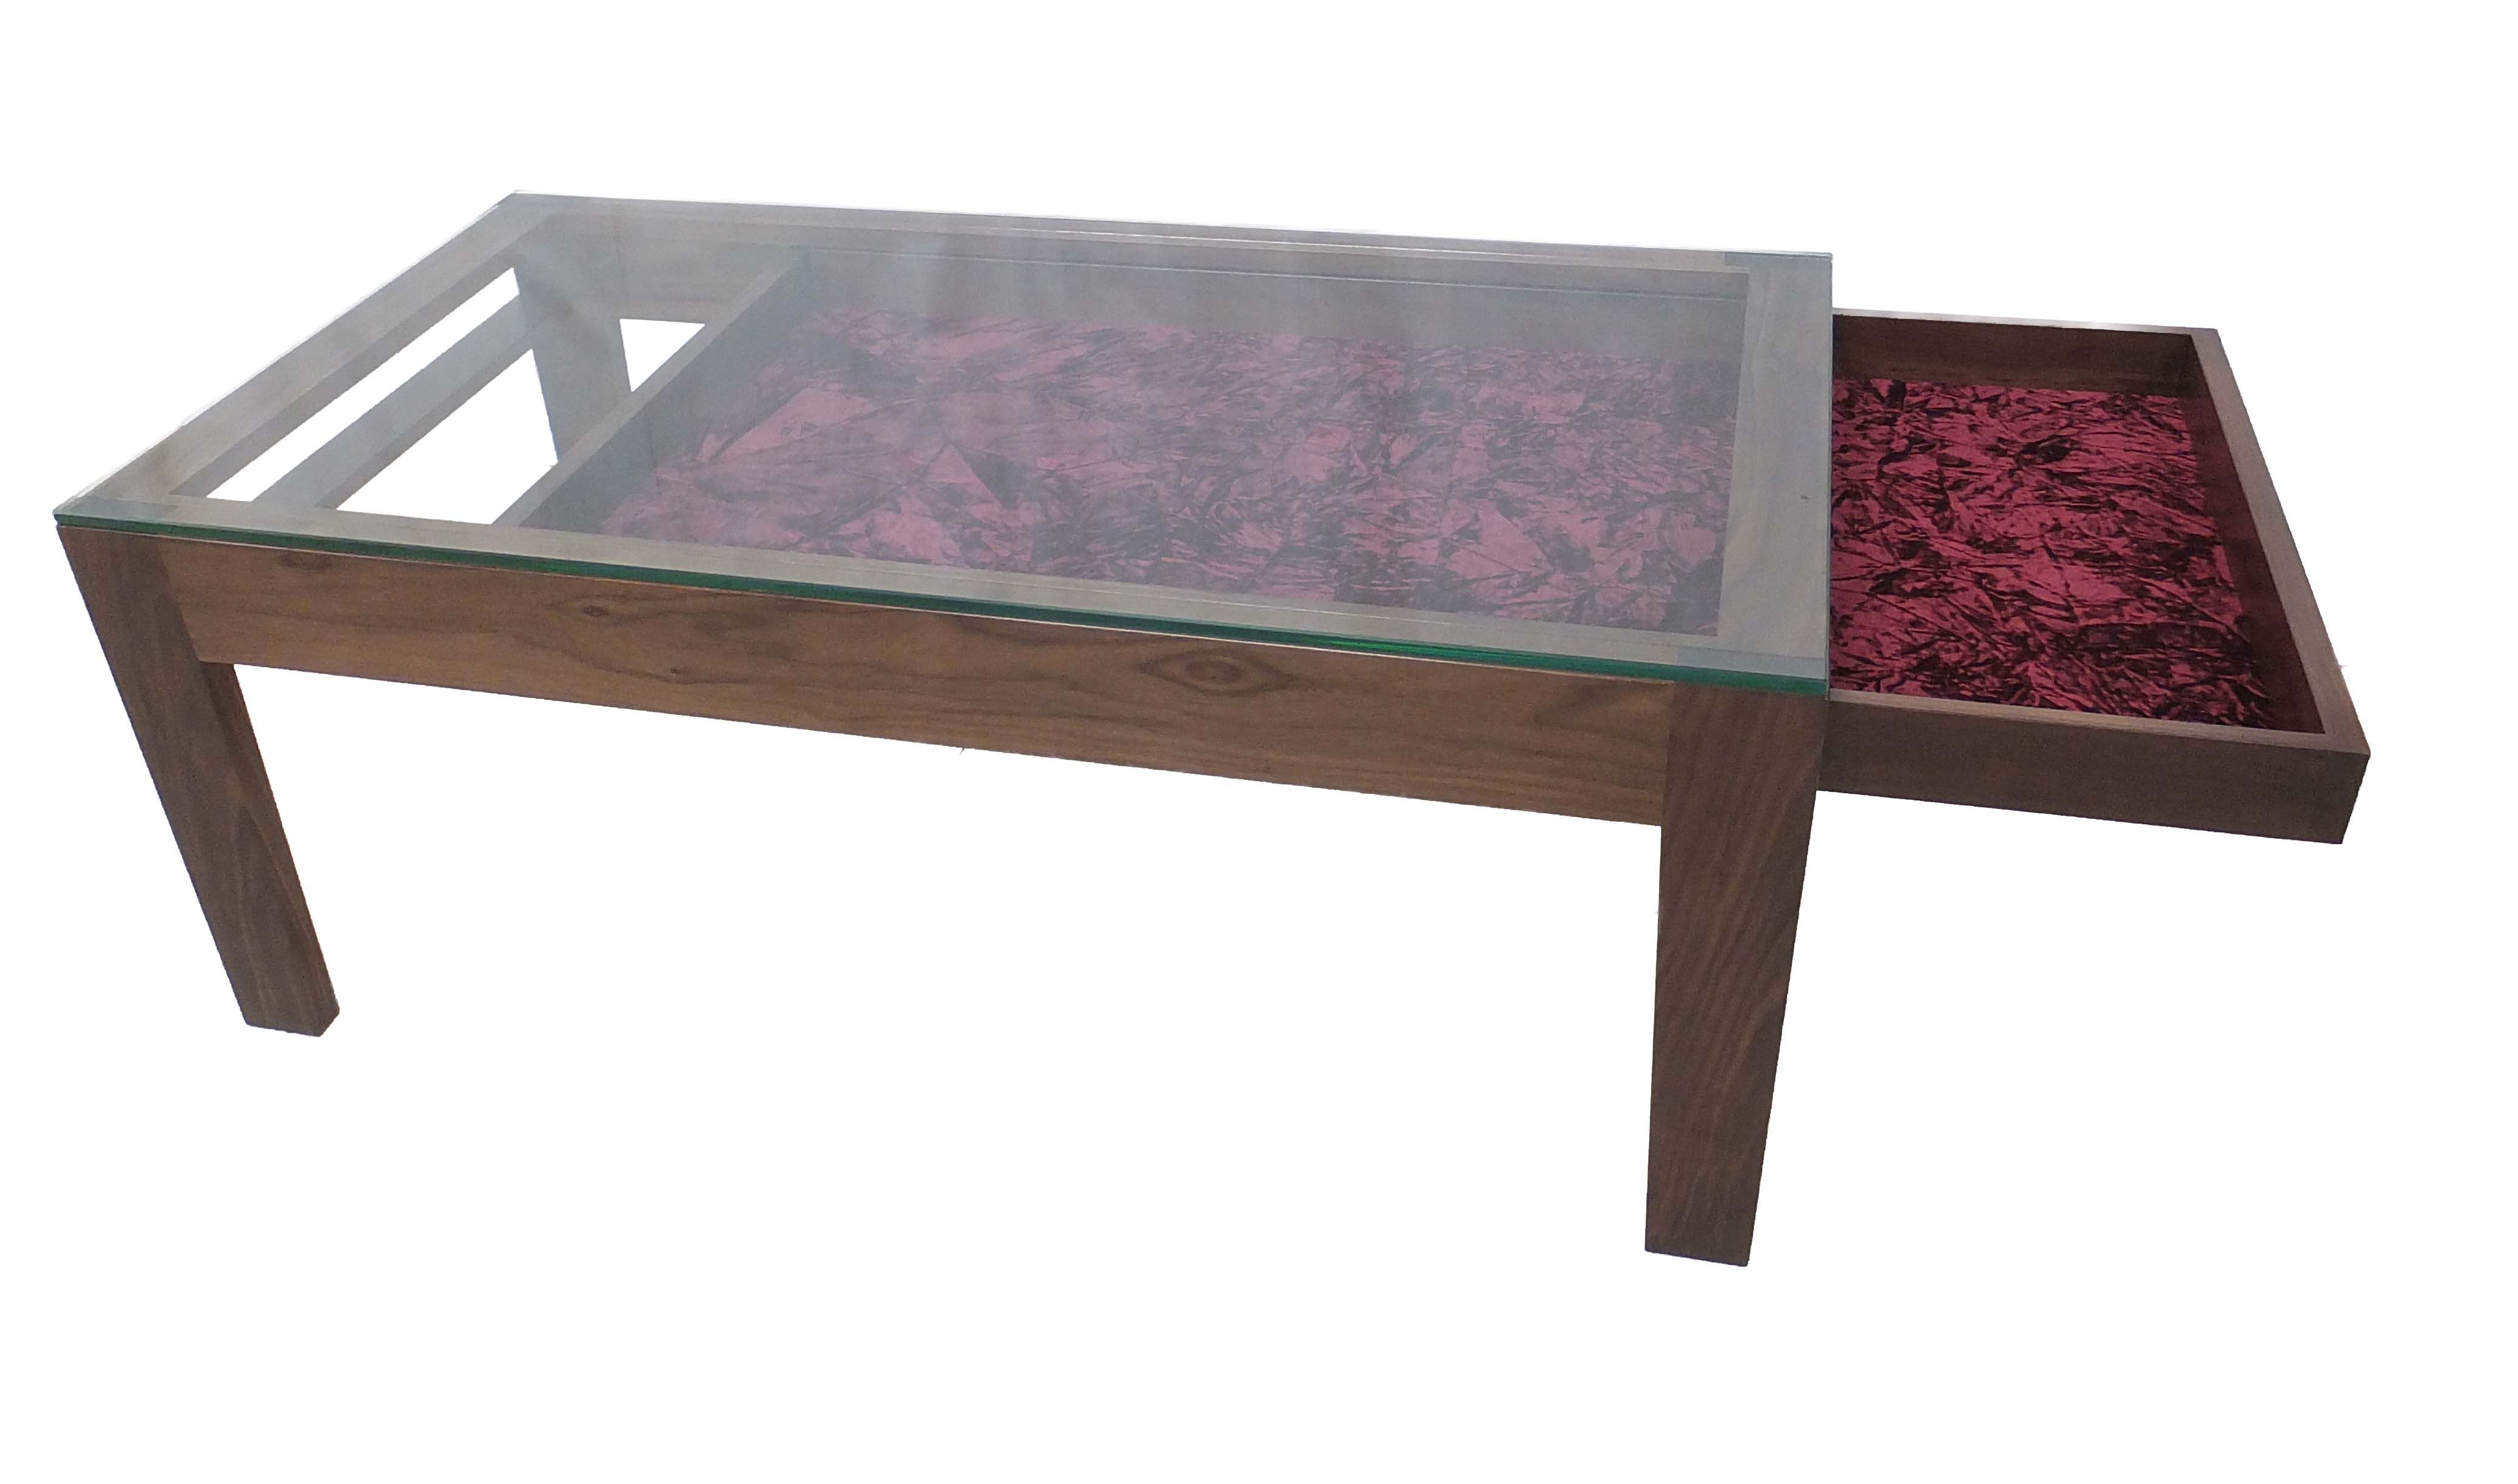 Coffee Table With Glass Display Top Modern Design Sofa Table Contemporary Wooden Beautiful Interior Furniture Design (View 5 of 11)